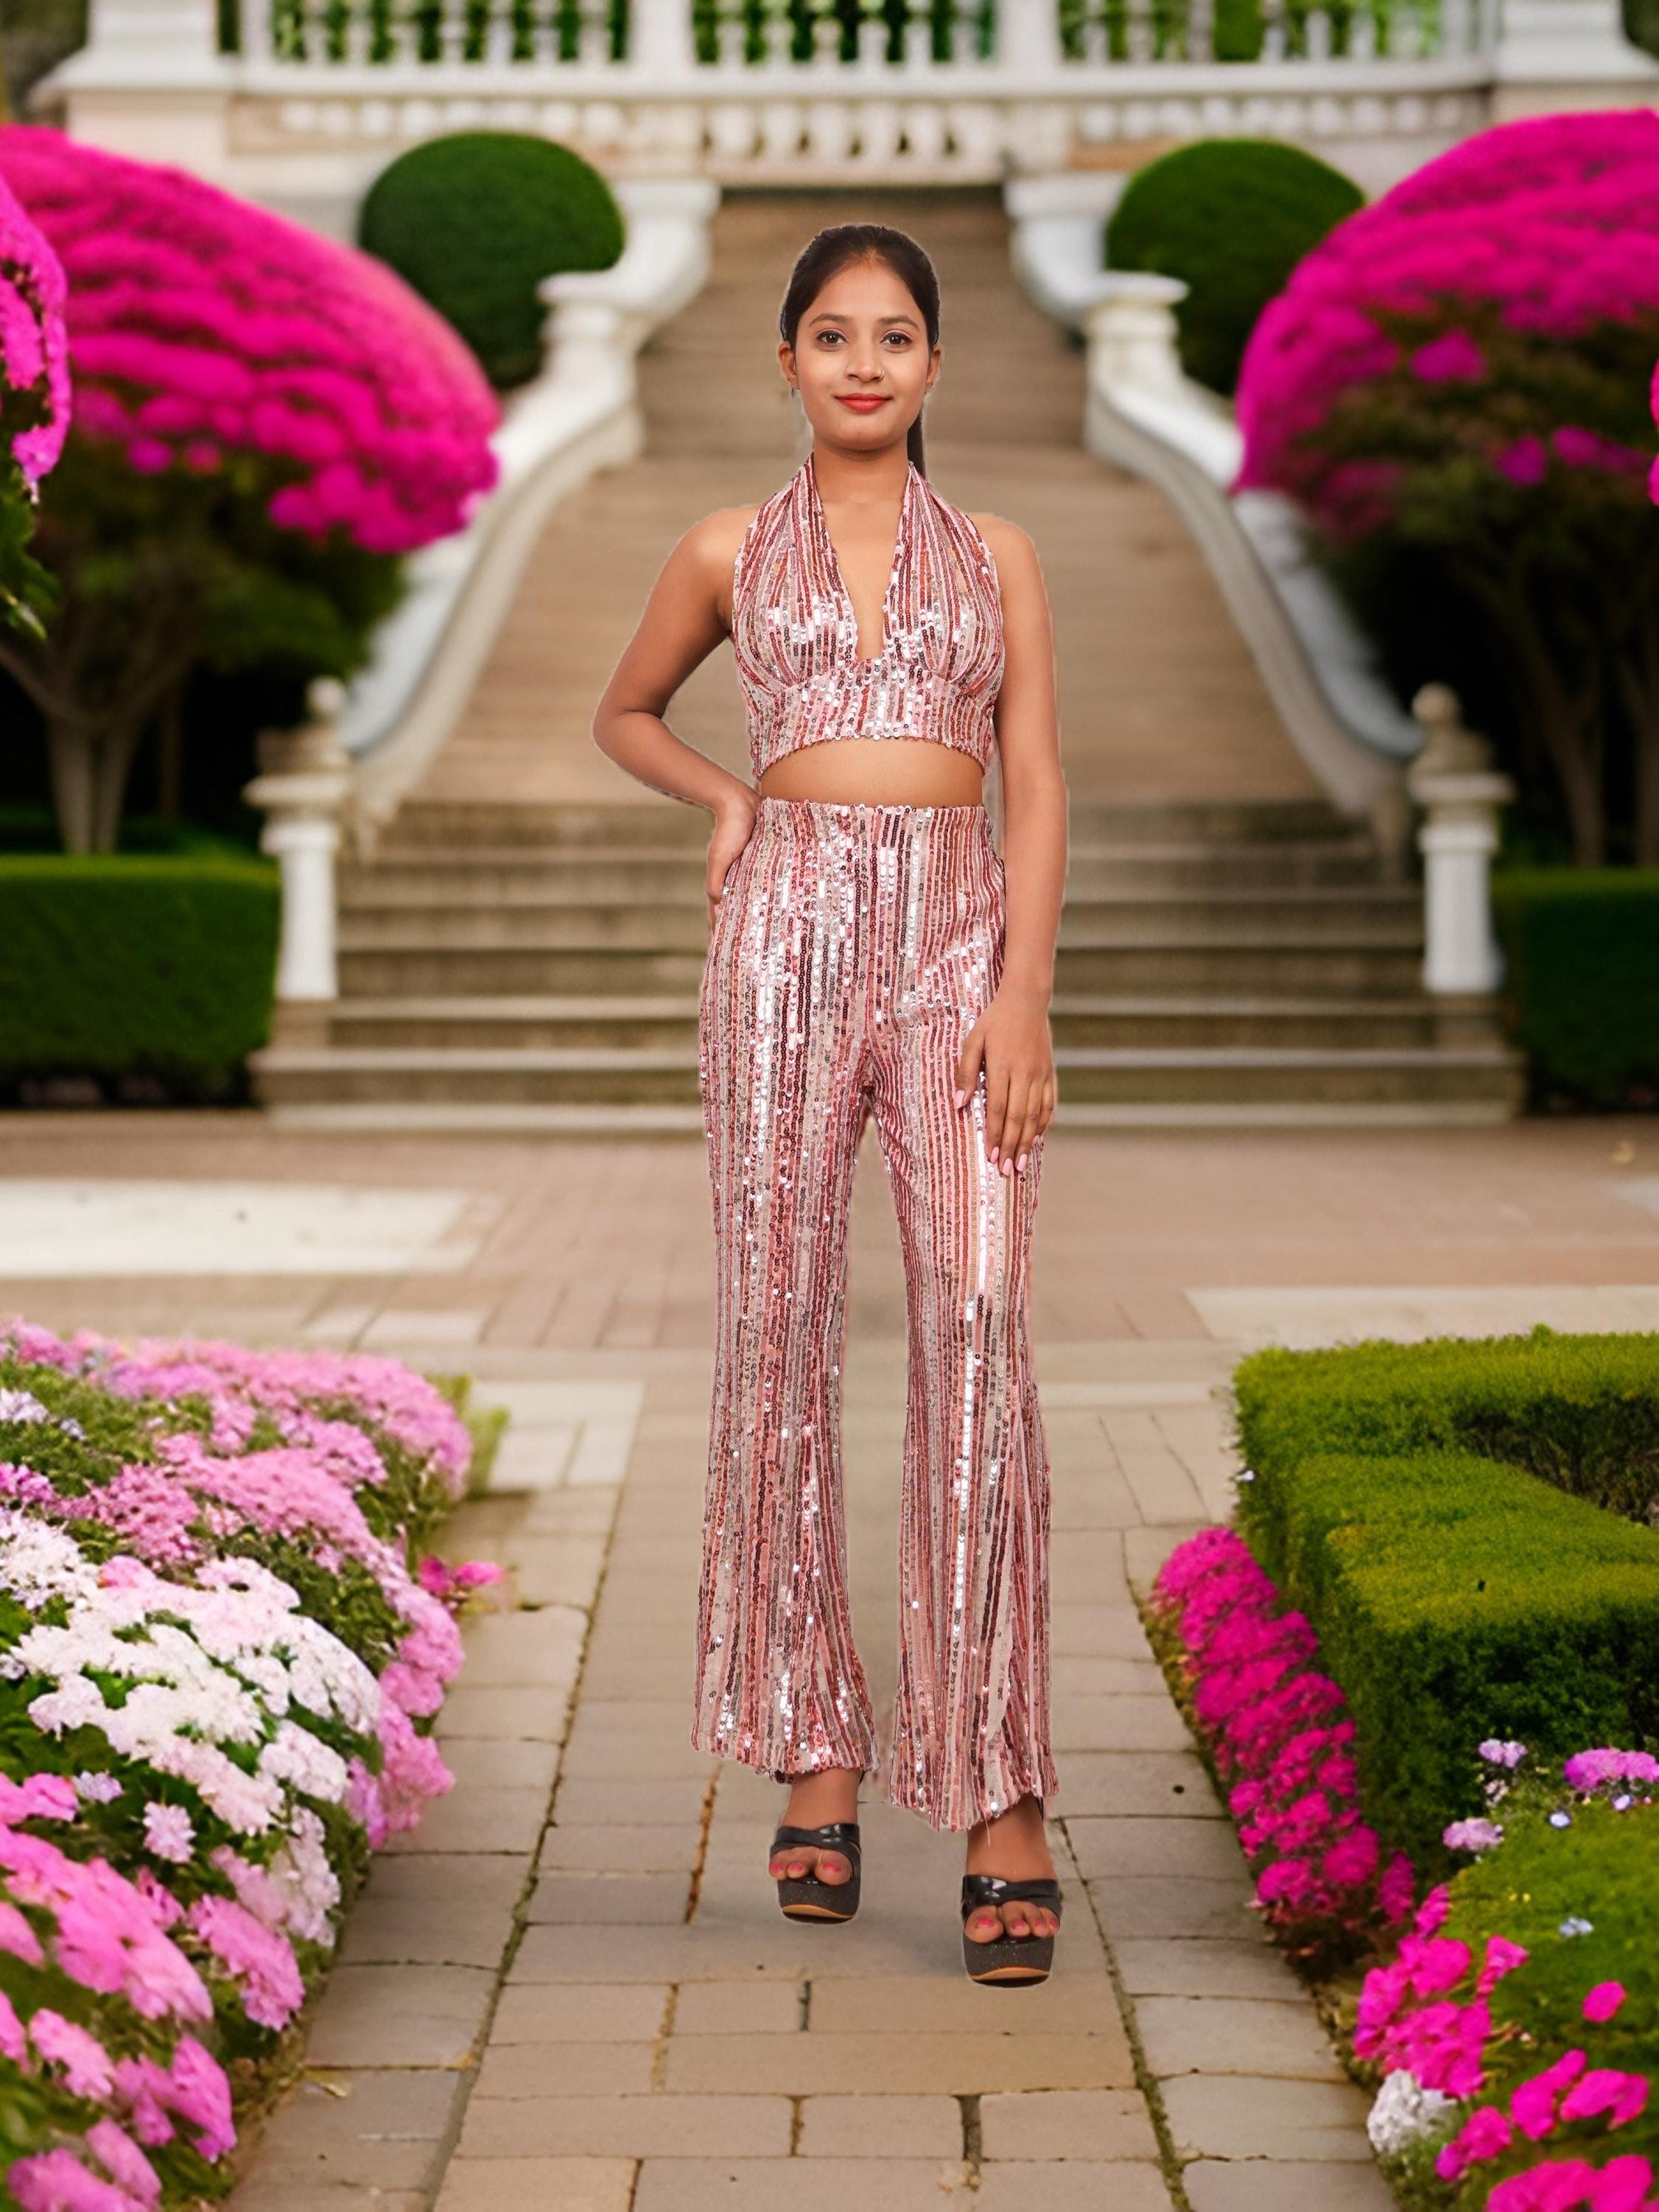 Glamour Halter Neck Sequins Bodycon Co-Ord Set by Shreekama Pink Dress for Party Festival Wedding Occasion in Noida